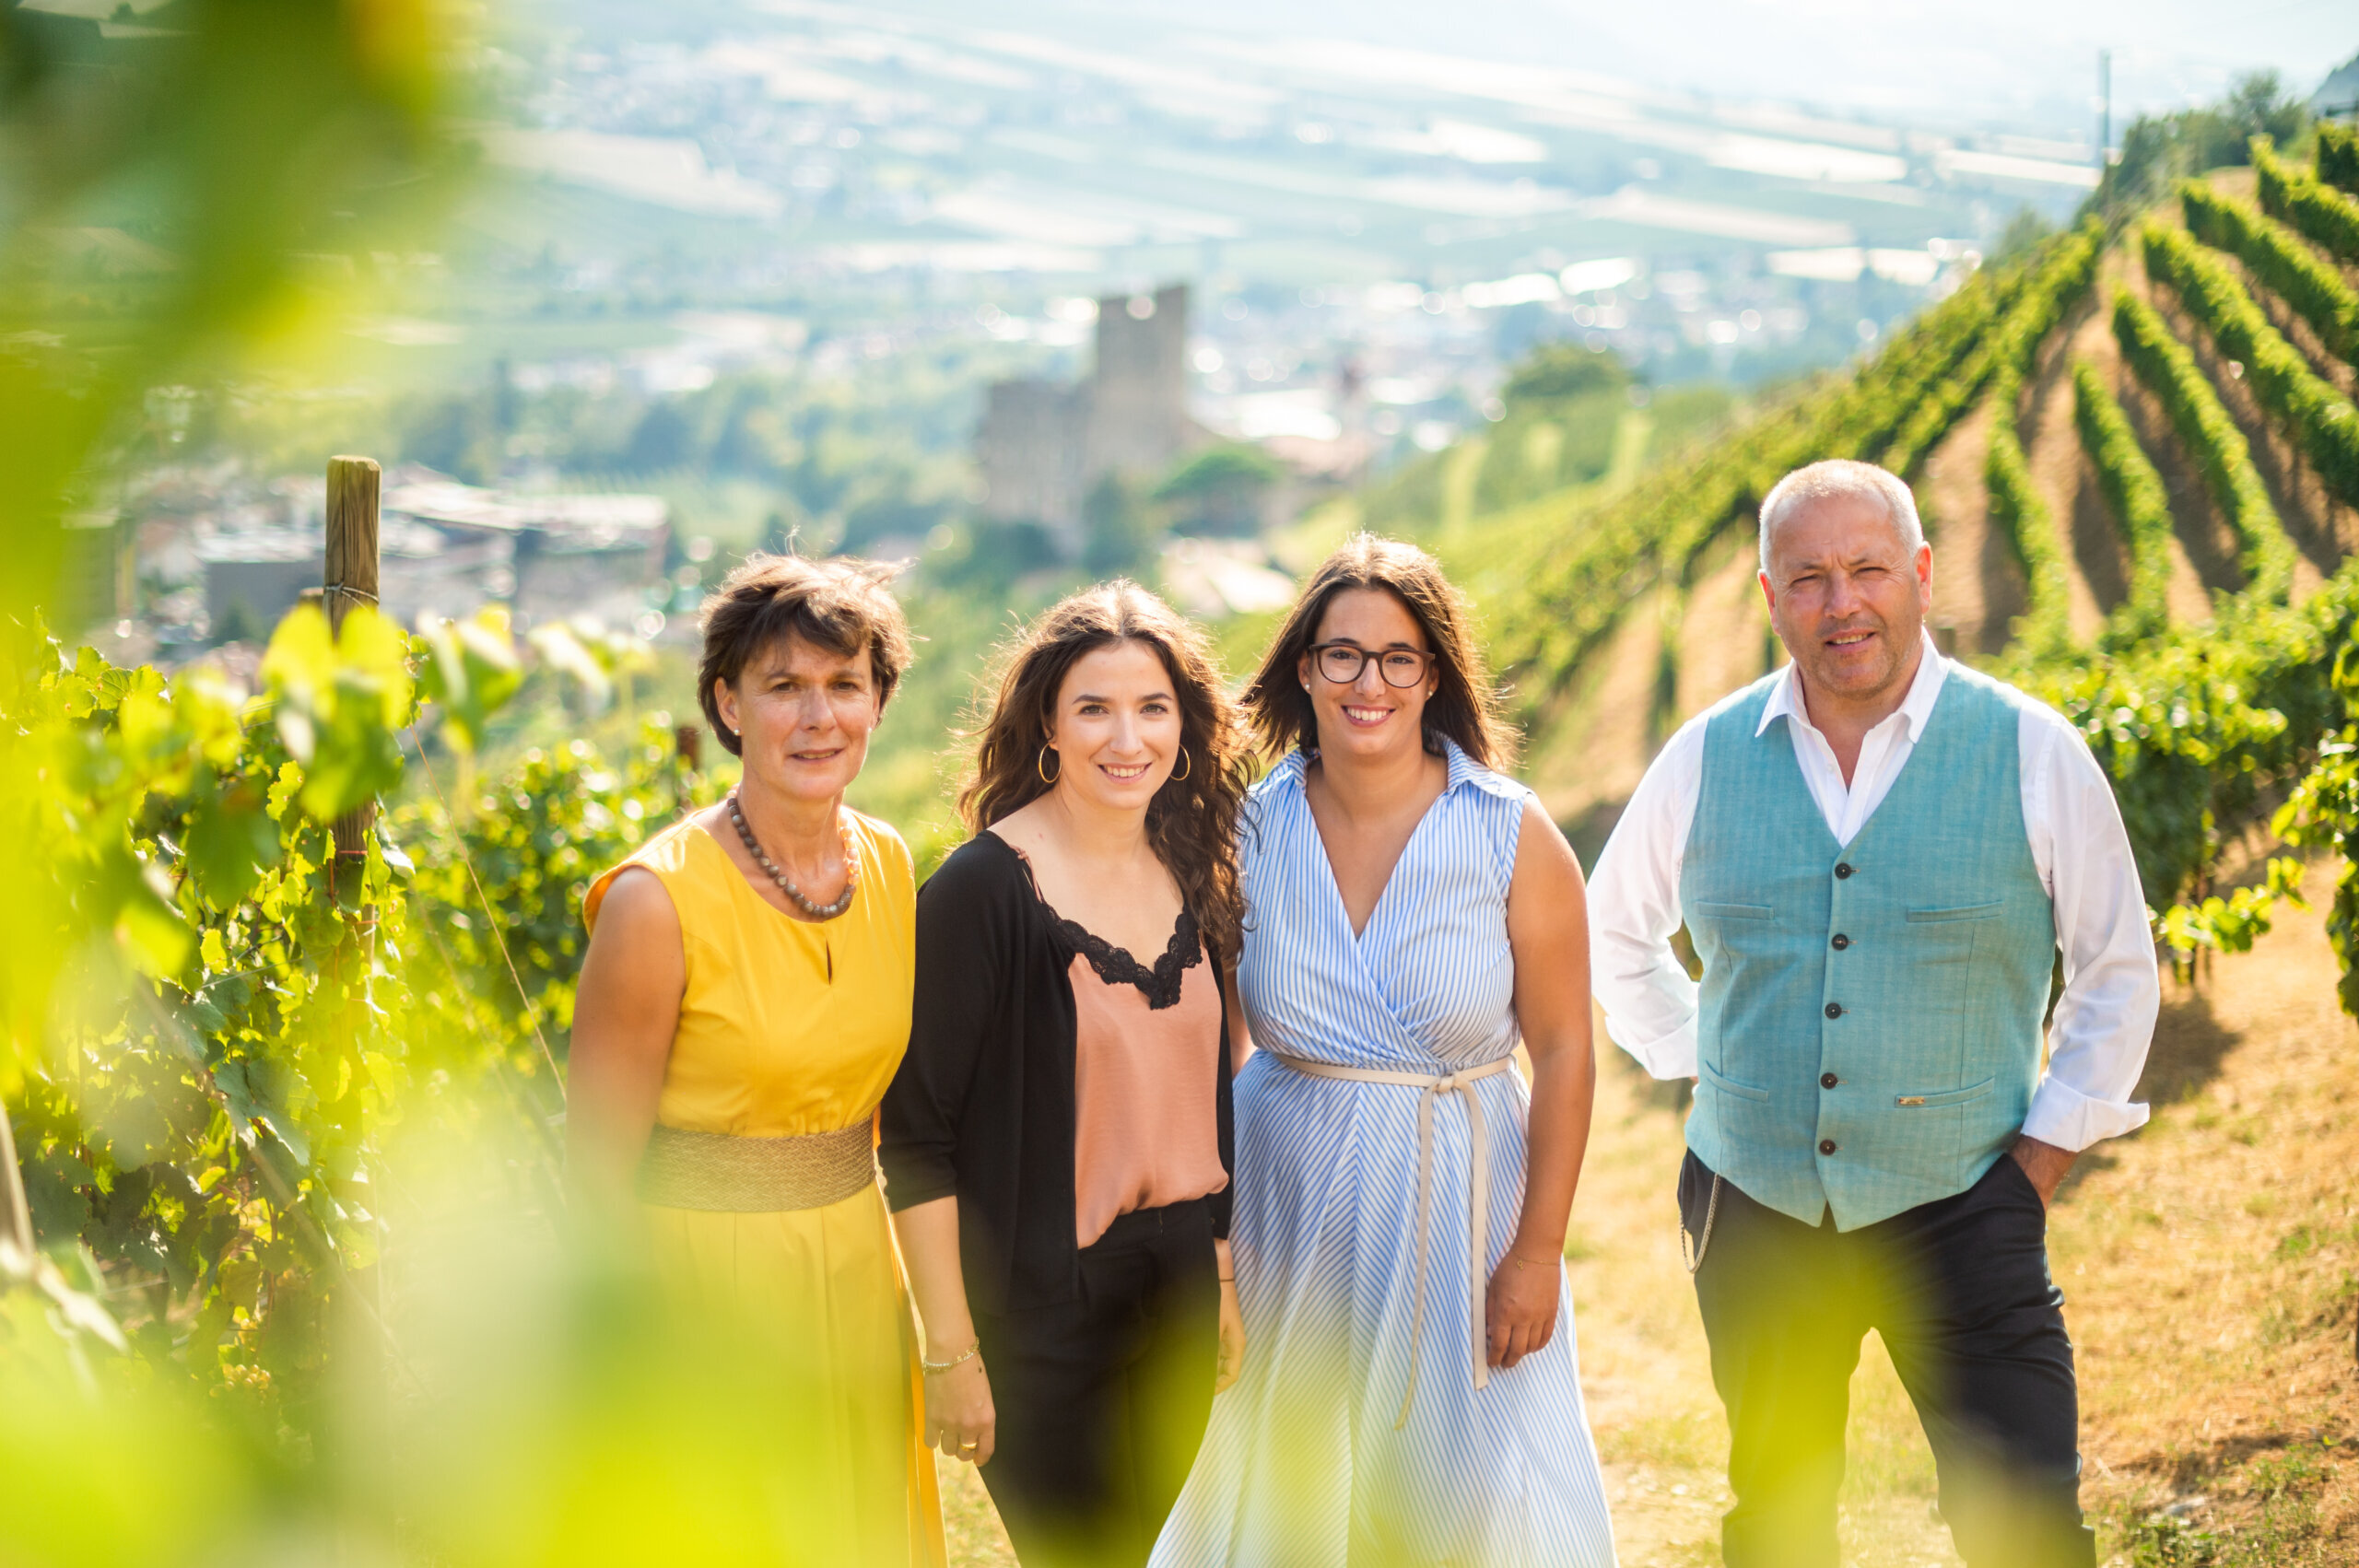 The Pratzner family of Falkenstein Winery makers wine 